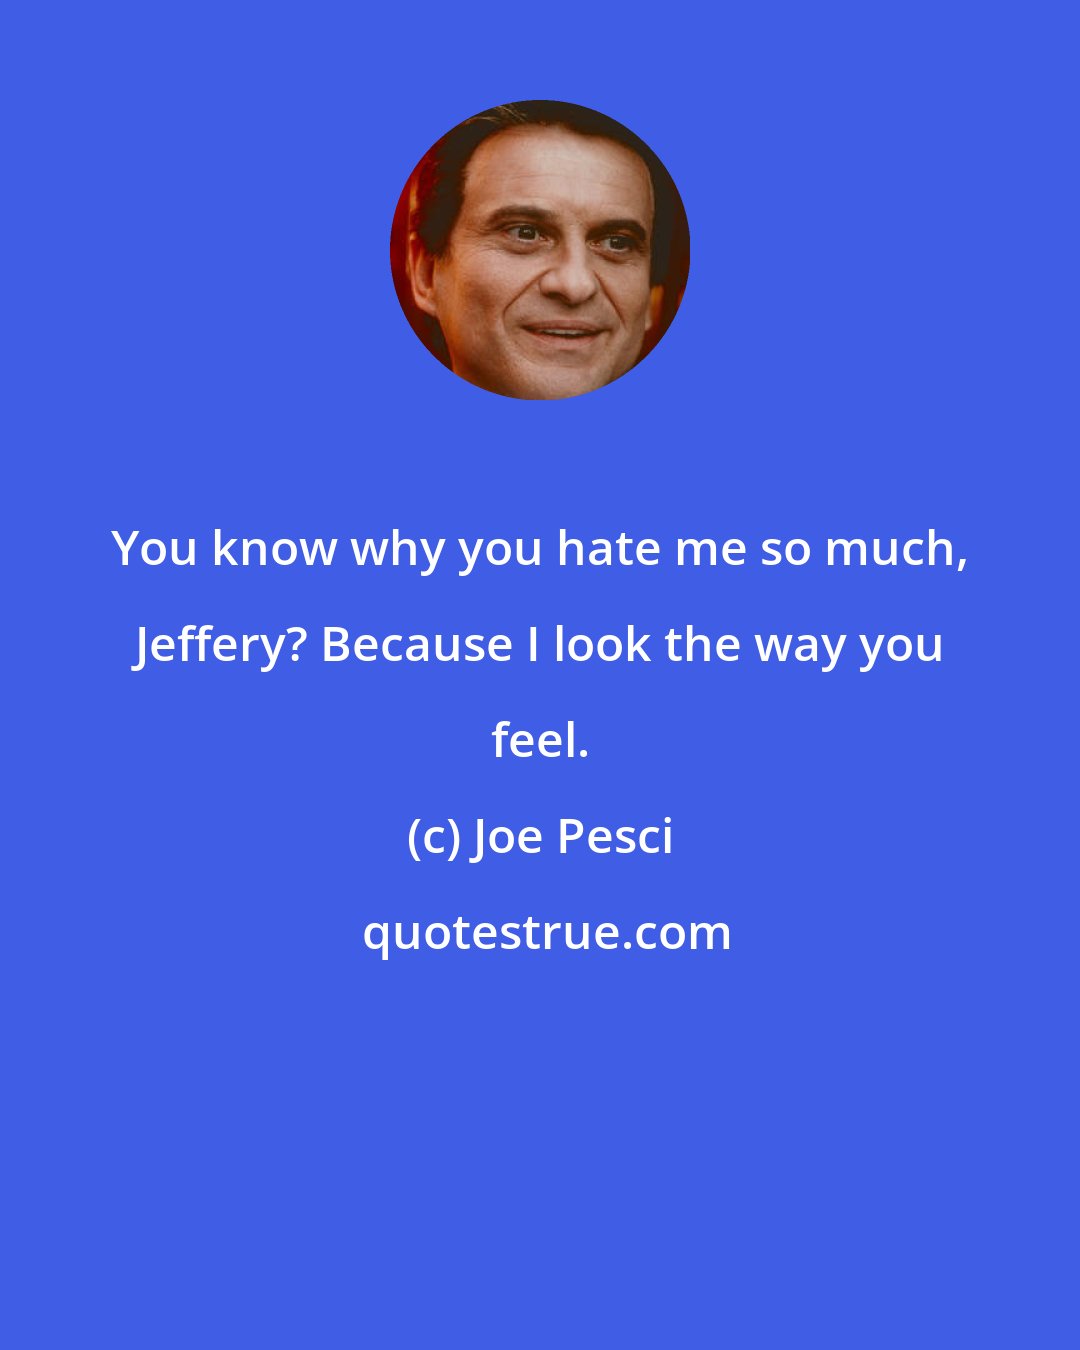 Joe Pesci: You know why you hate me so much, Jeffery? Because I look the way you feel.